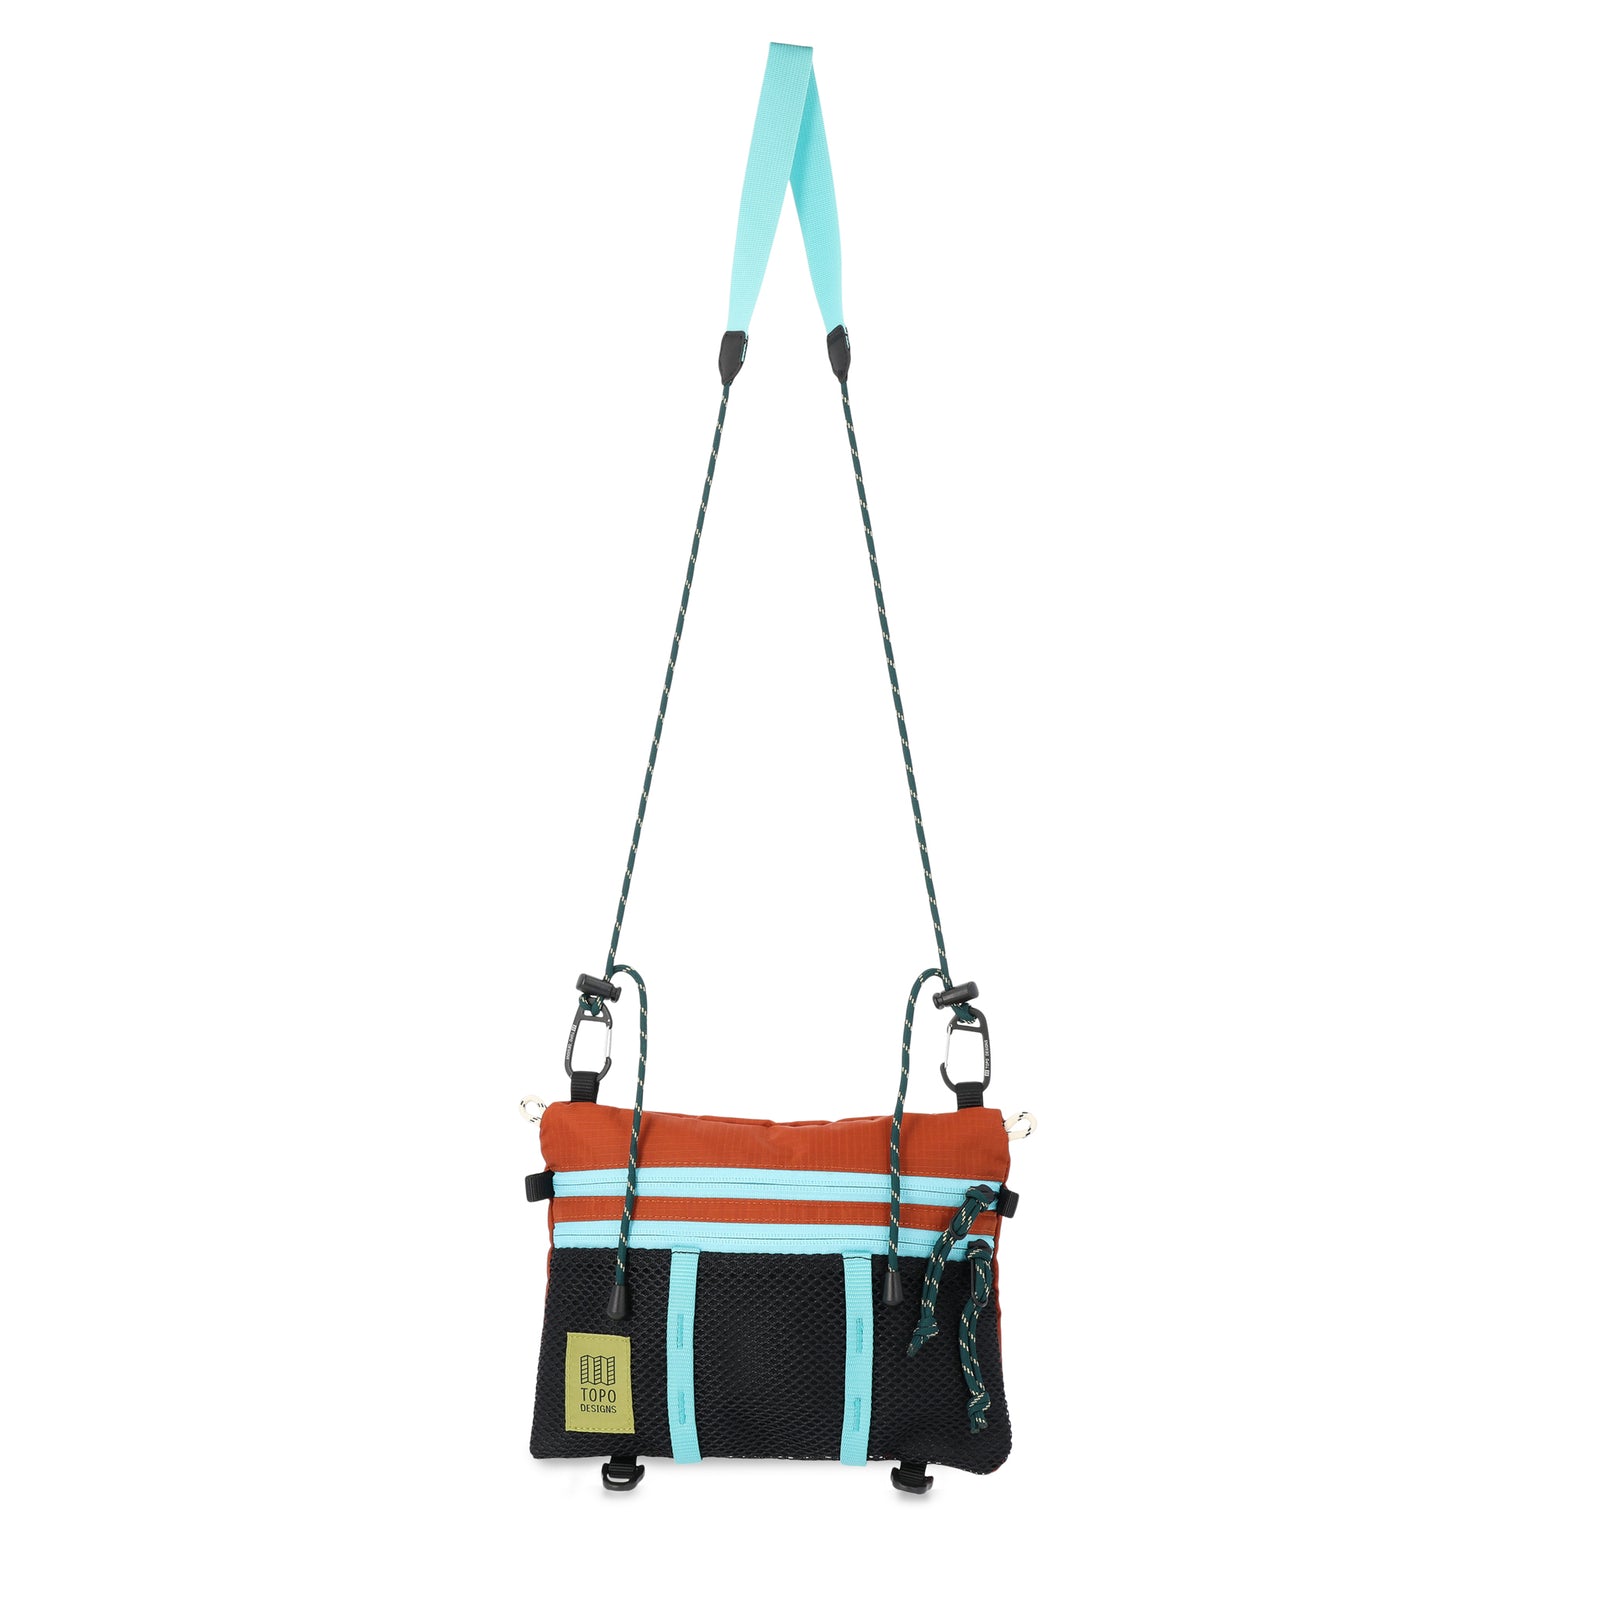 Topo Designs Mountain Accessory crossbody Shoulder Bag in orange "Clay / Black" lightweight recycled nylon.